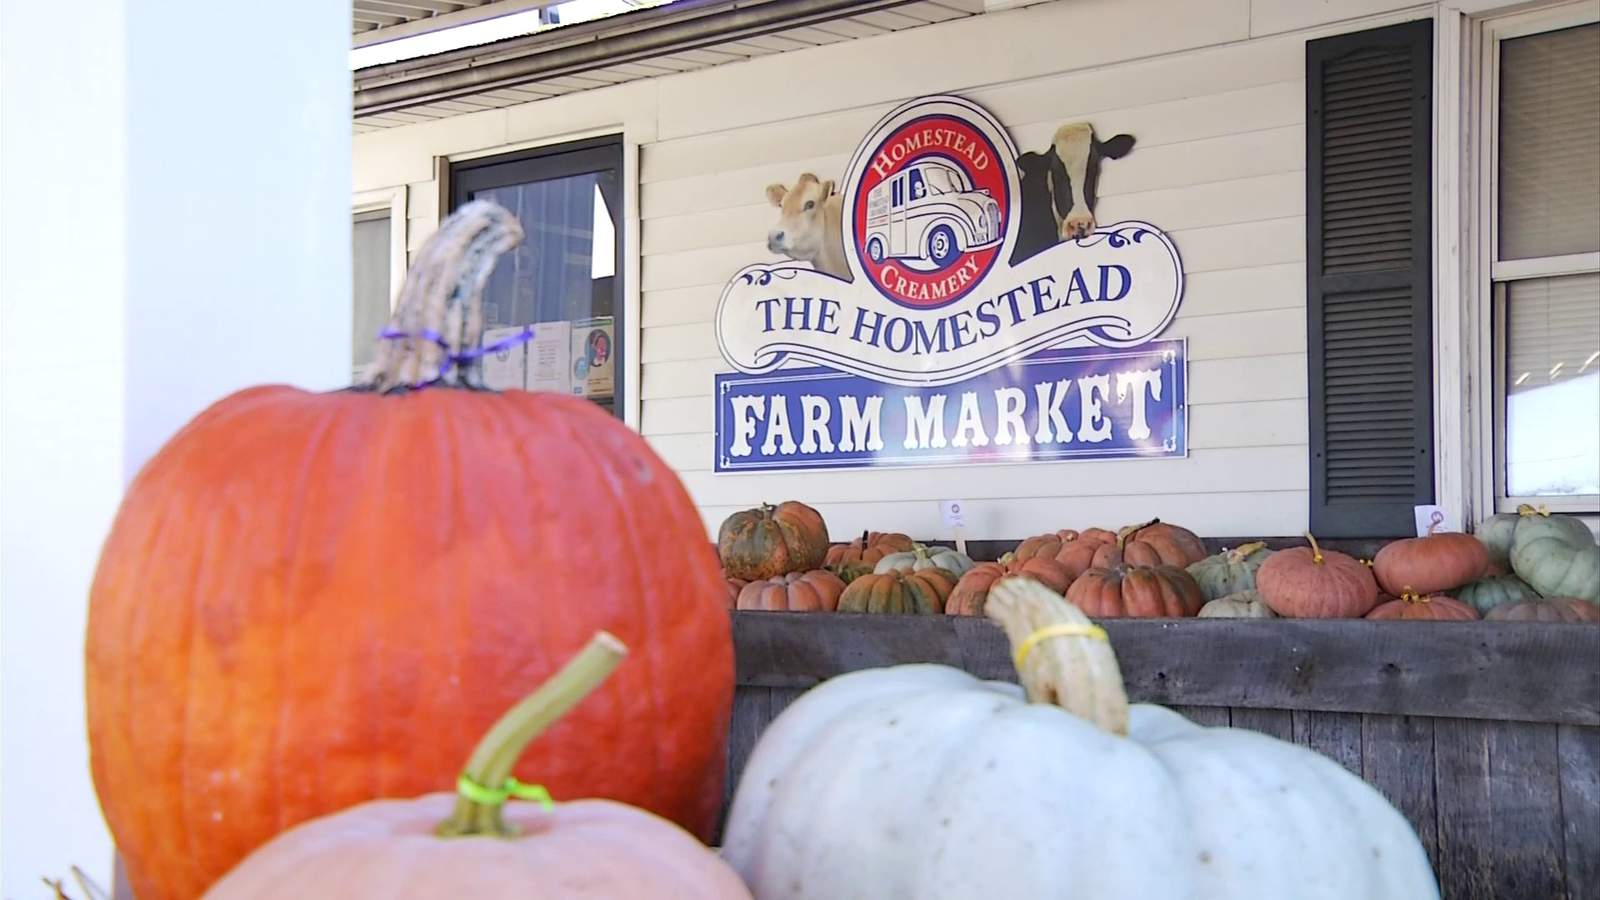 Tasty Tuesday: Homestead Creamery holds on to heritage, history and great taste